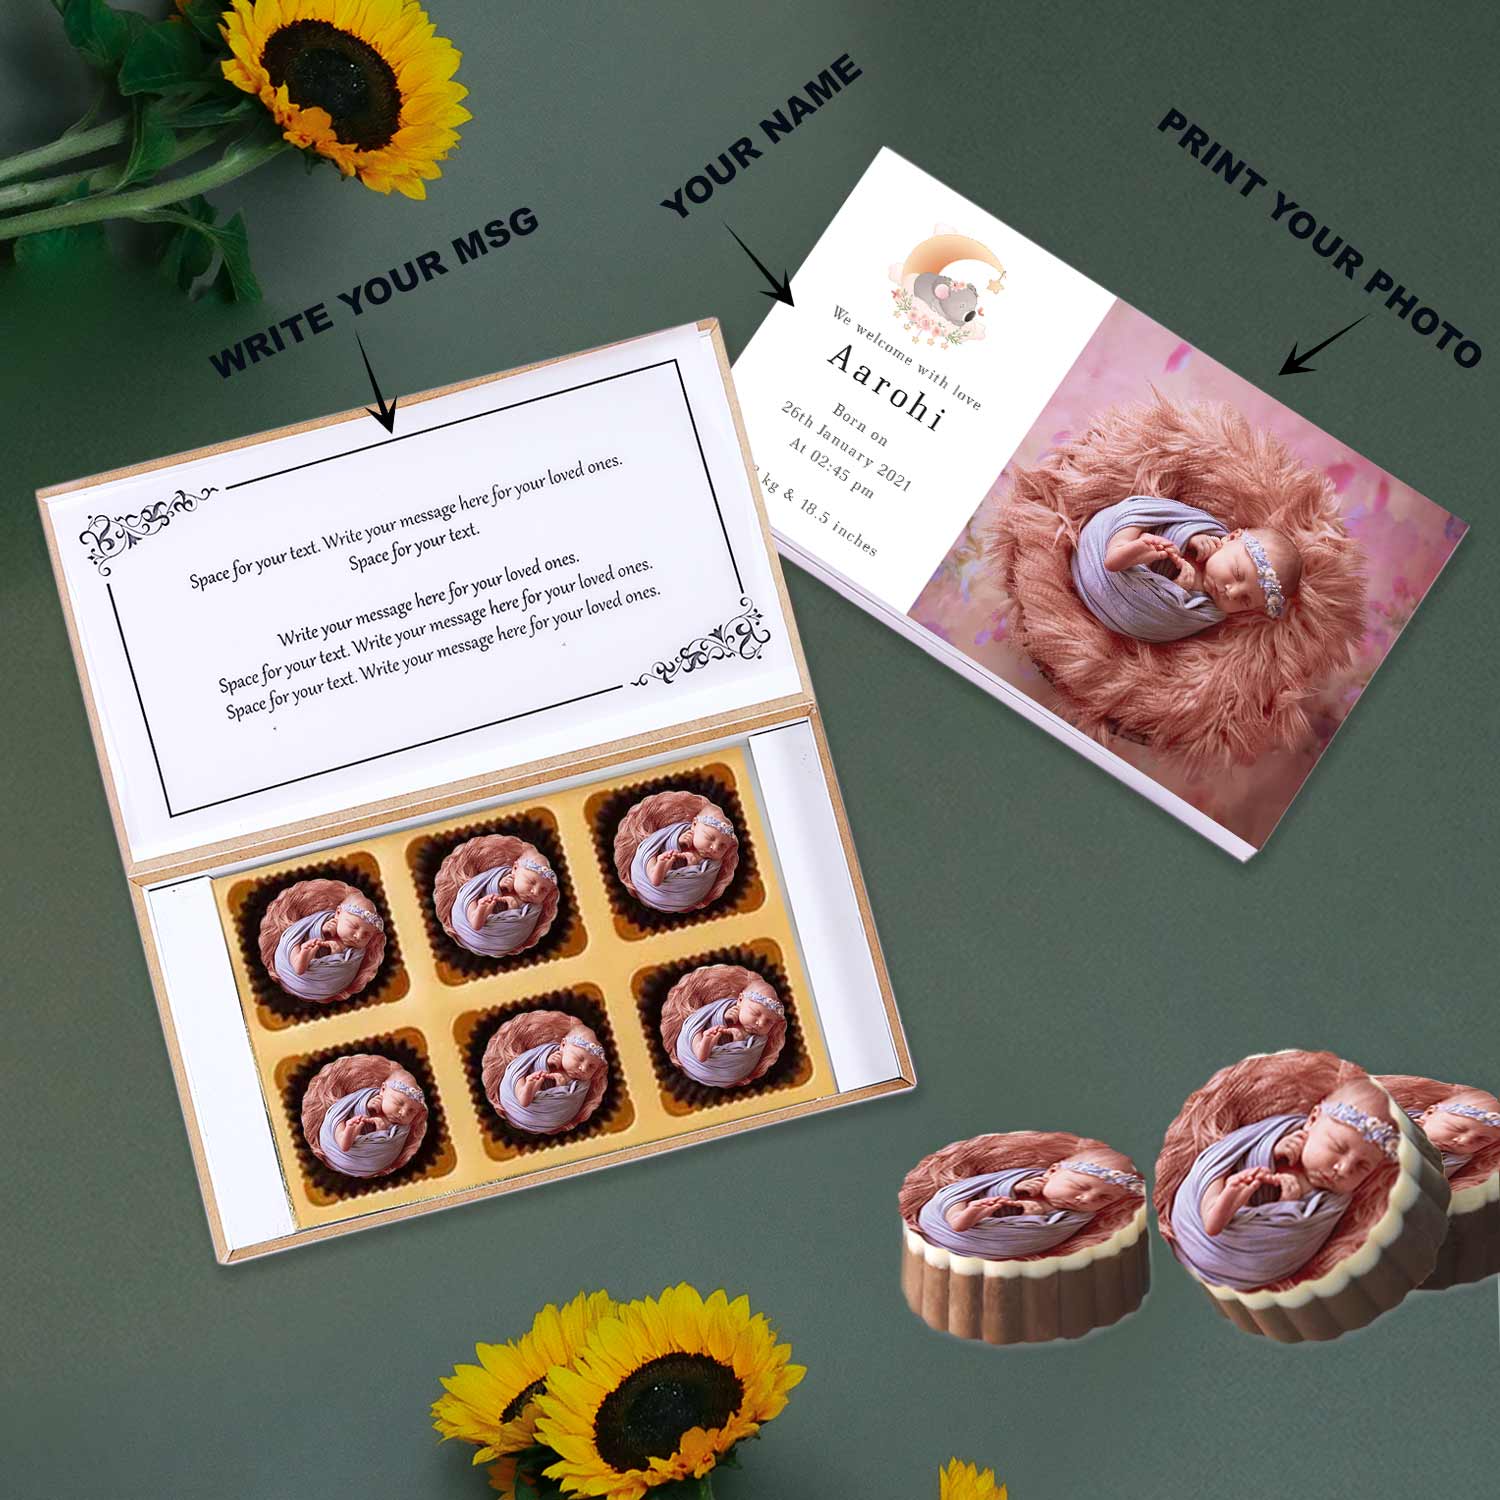 Sleeping with moon & star photo printed chocolates baby announcement